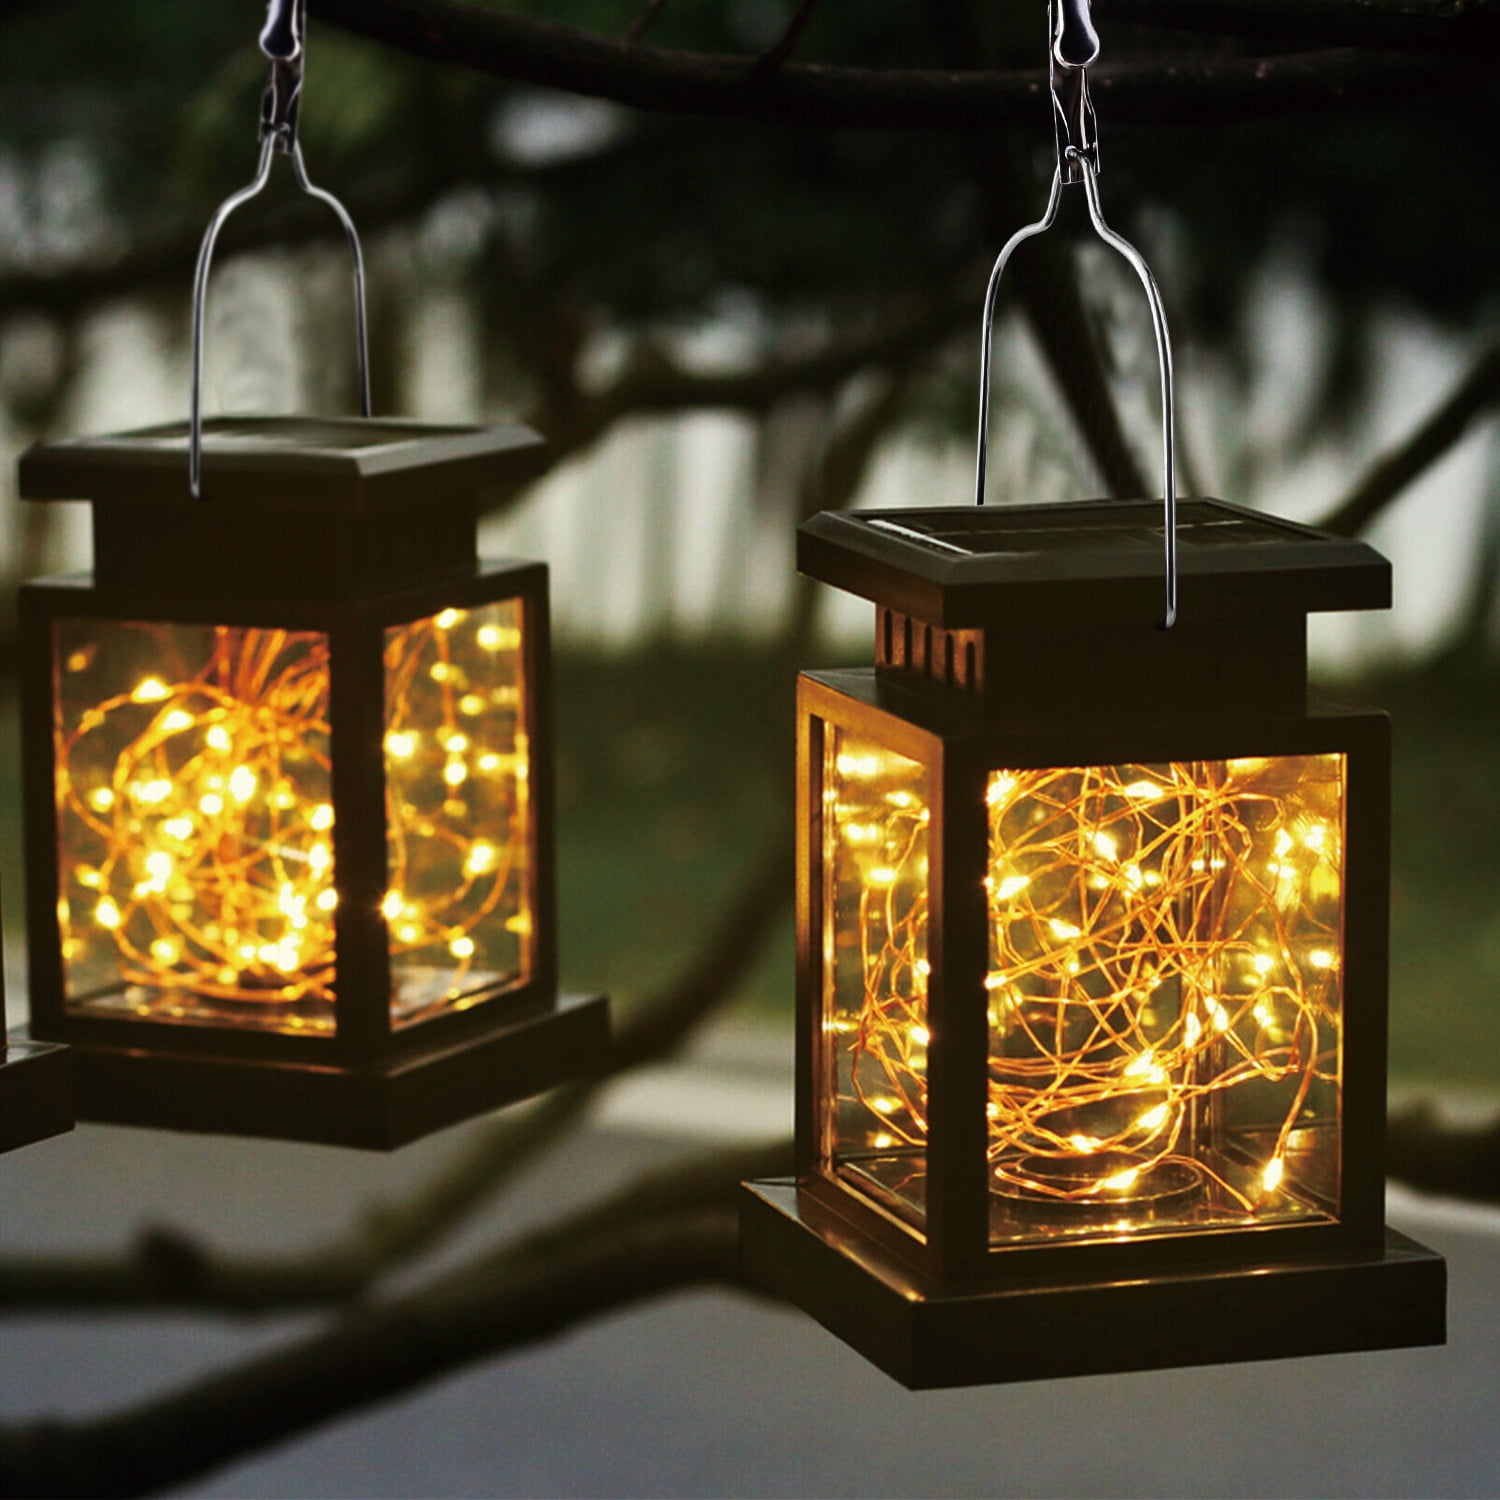 10x LED Battery Operated Lantern String Lights Indoor Copper Rose Gold Rustic 